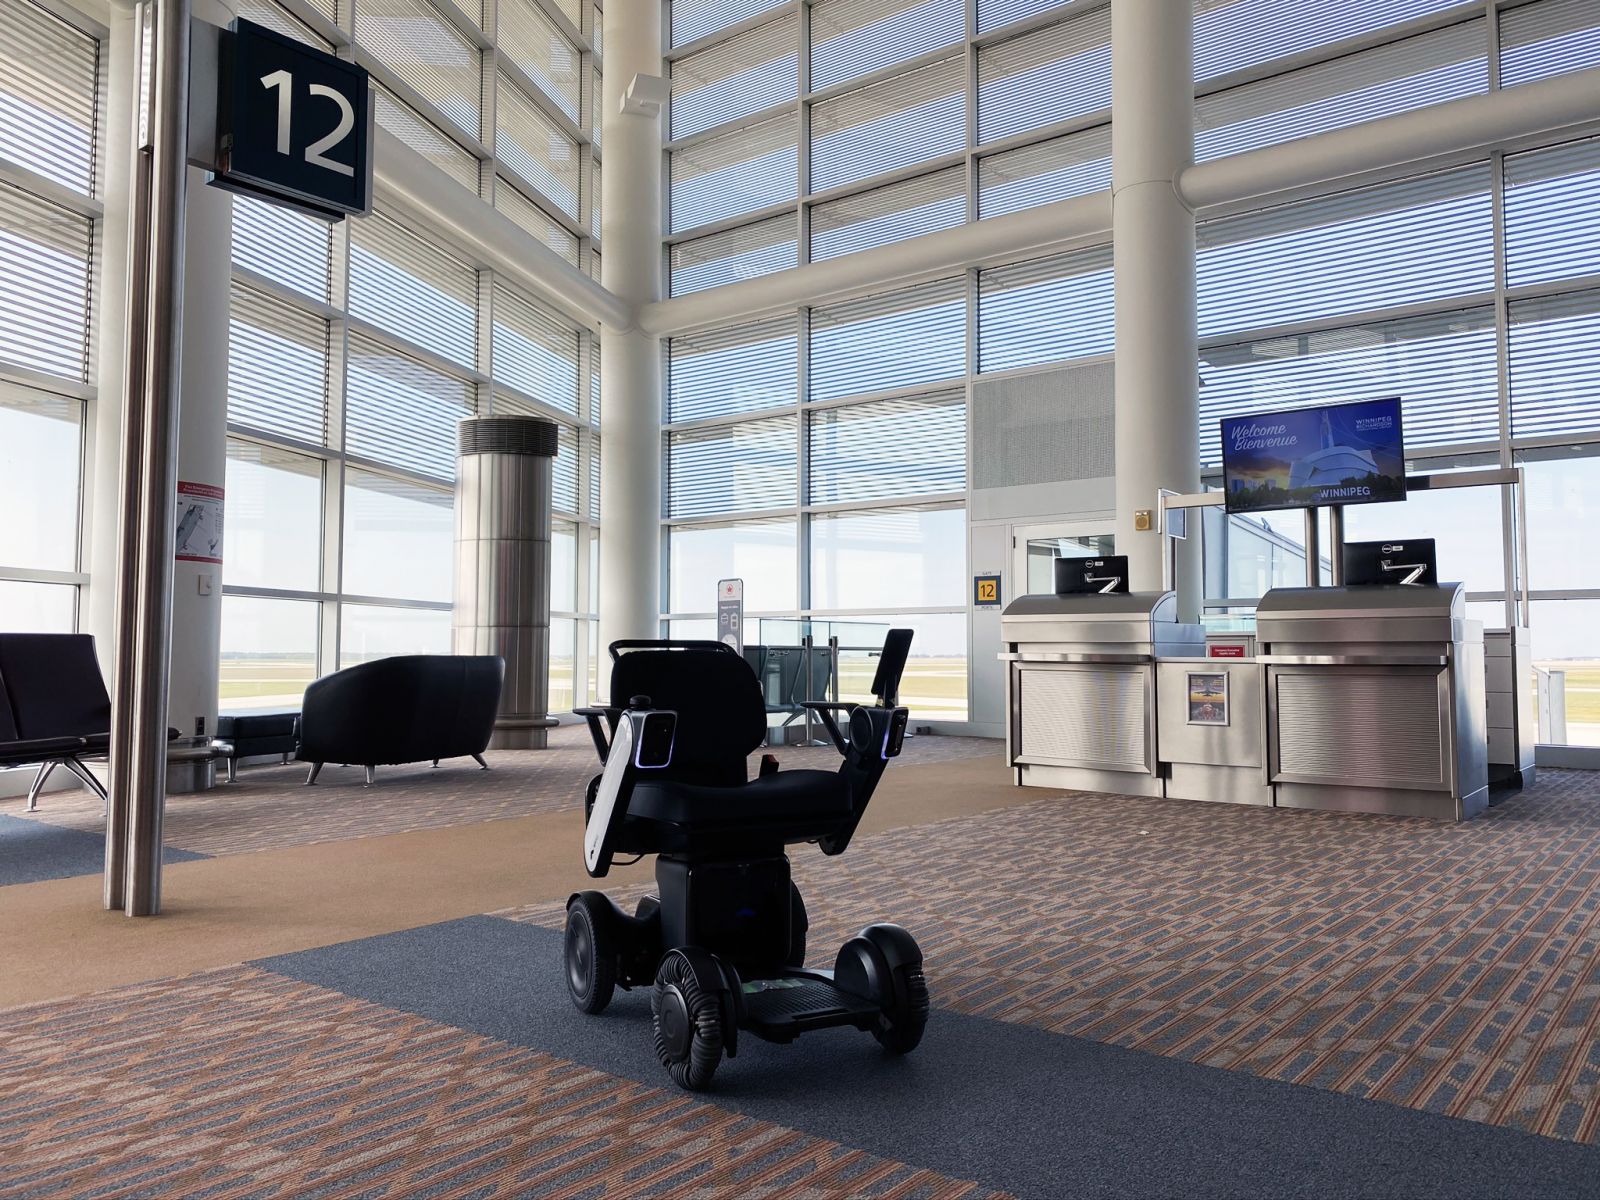 WHILL personal autonomous mobility device stationed near gate 12 at YWG